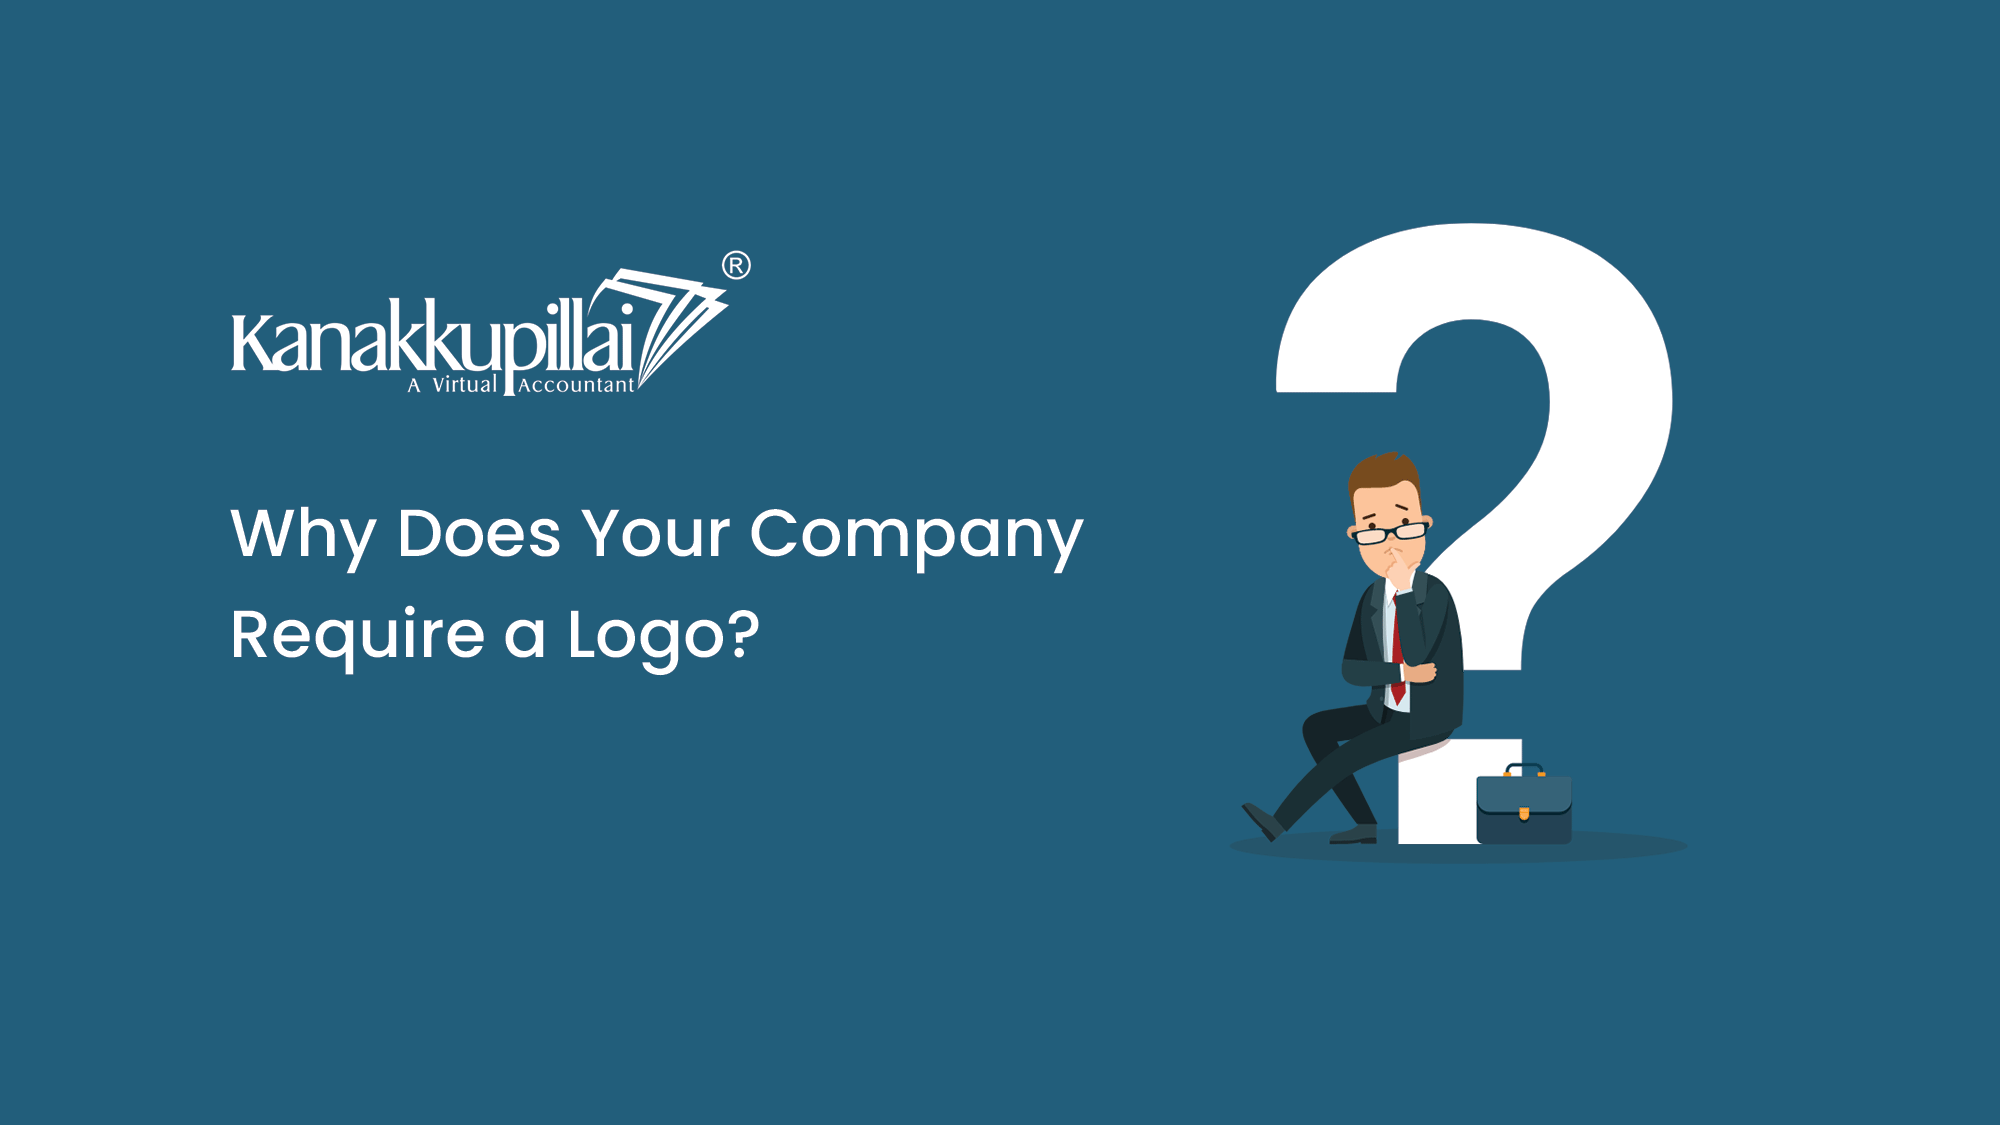 Why Does Your Company Require a Logo?